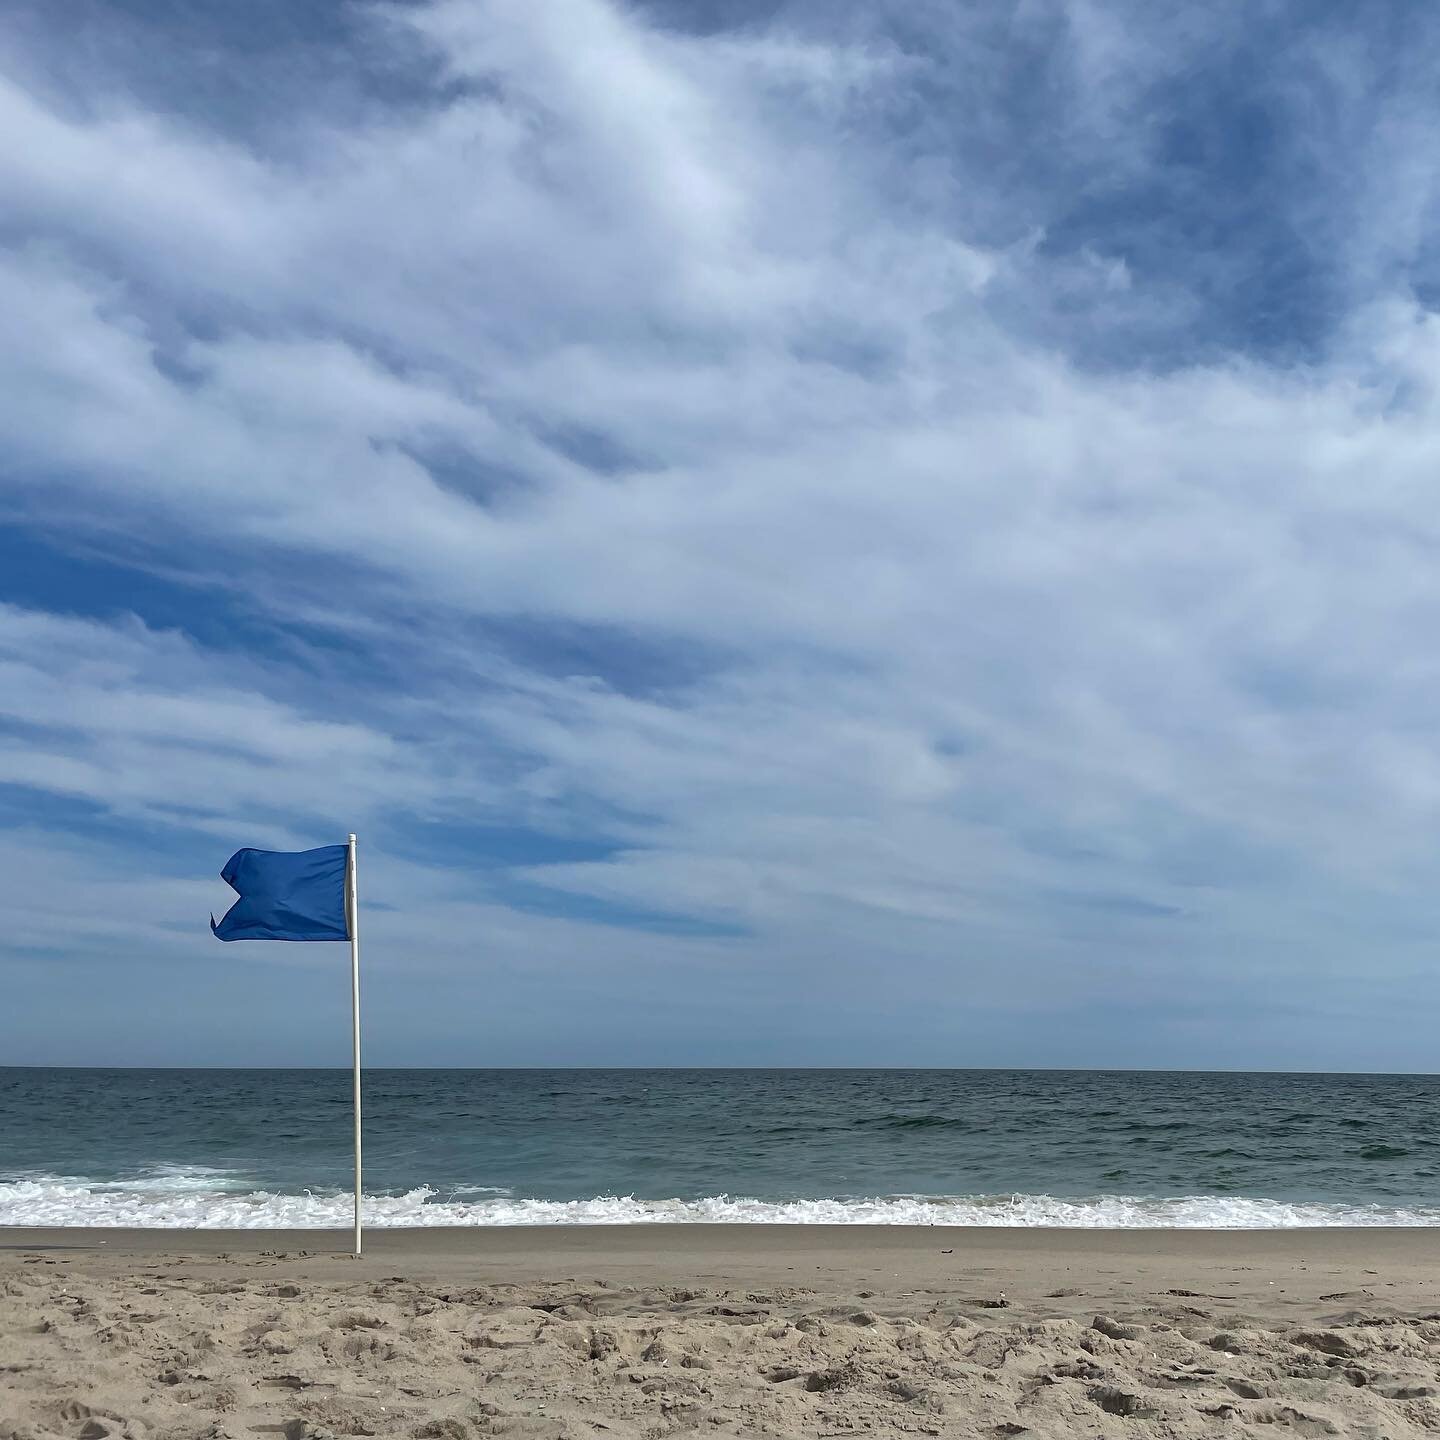 And relax
*
*
*
#ontheroadagain #beachlife #flags